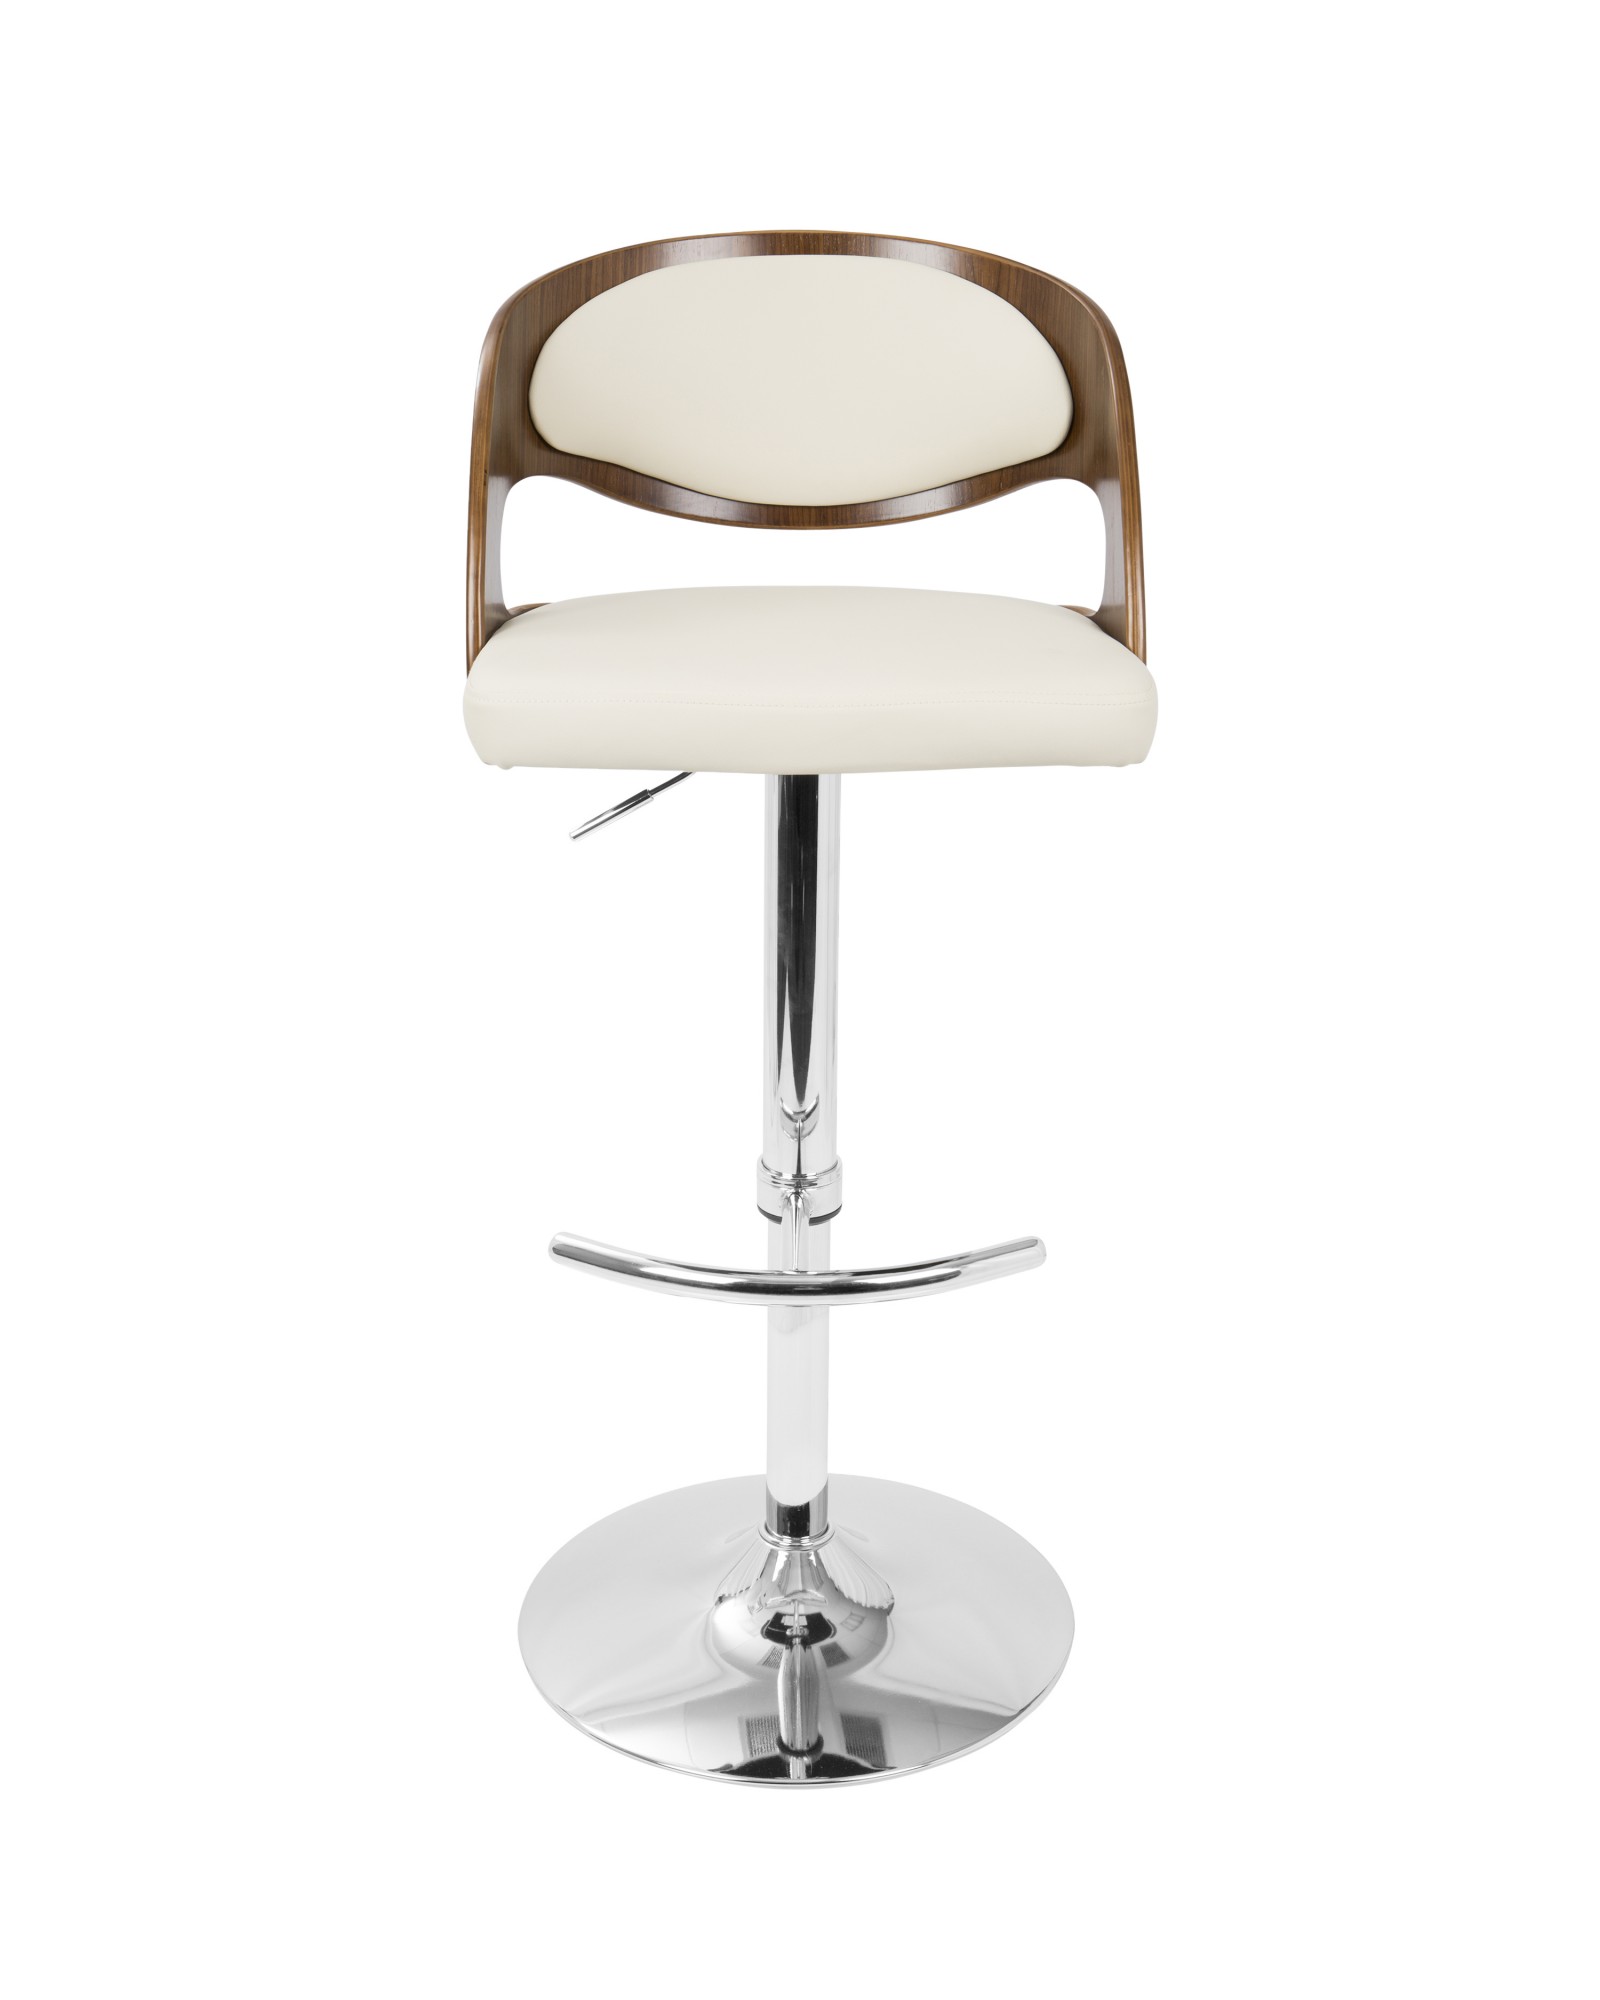 Pino Mid-Century Modern Adjustable Barstool with Swivel in Walnut and Cream Faux Leather